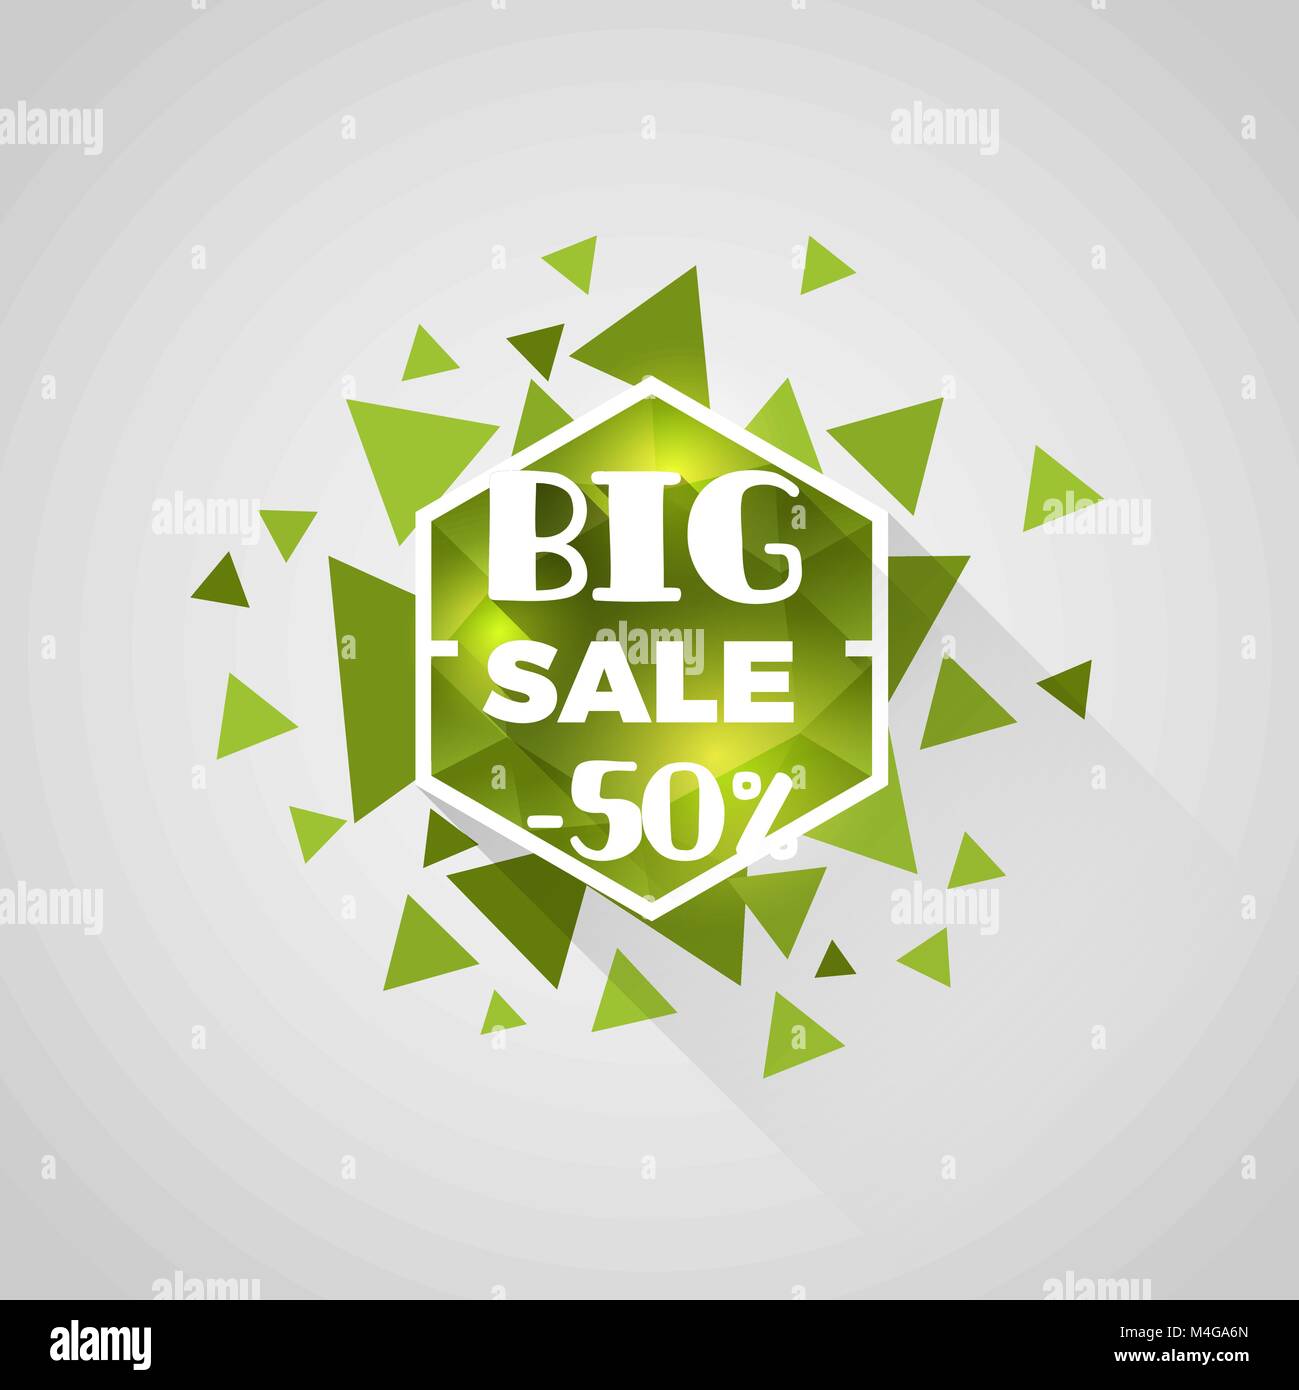 big sale green polygonal crystal tag with abstract triangle elements Stock Vector